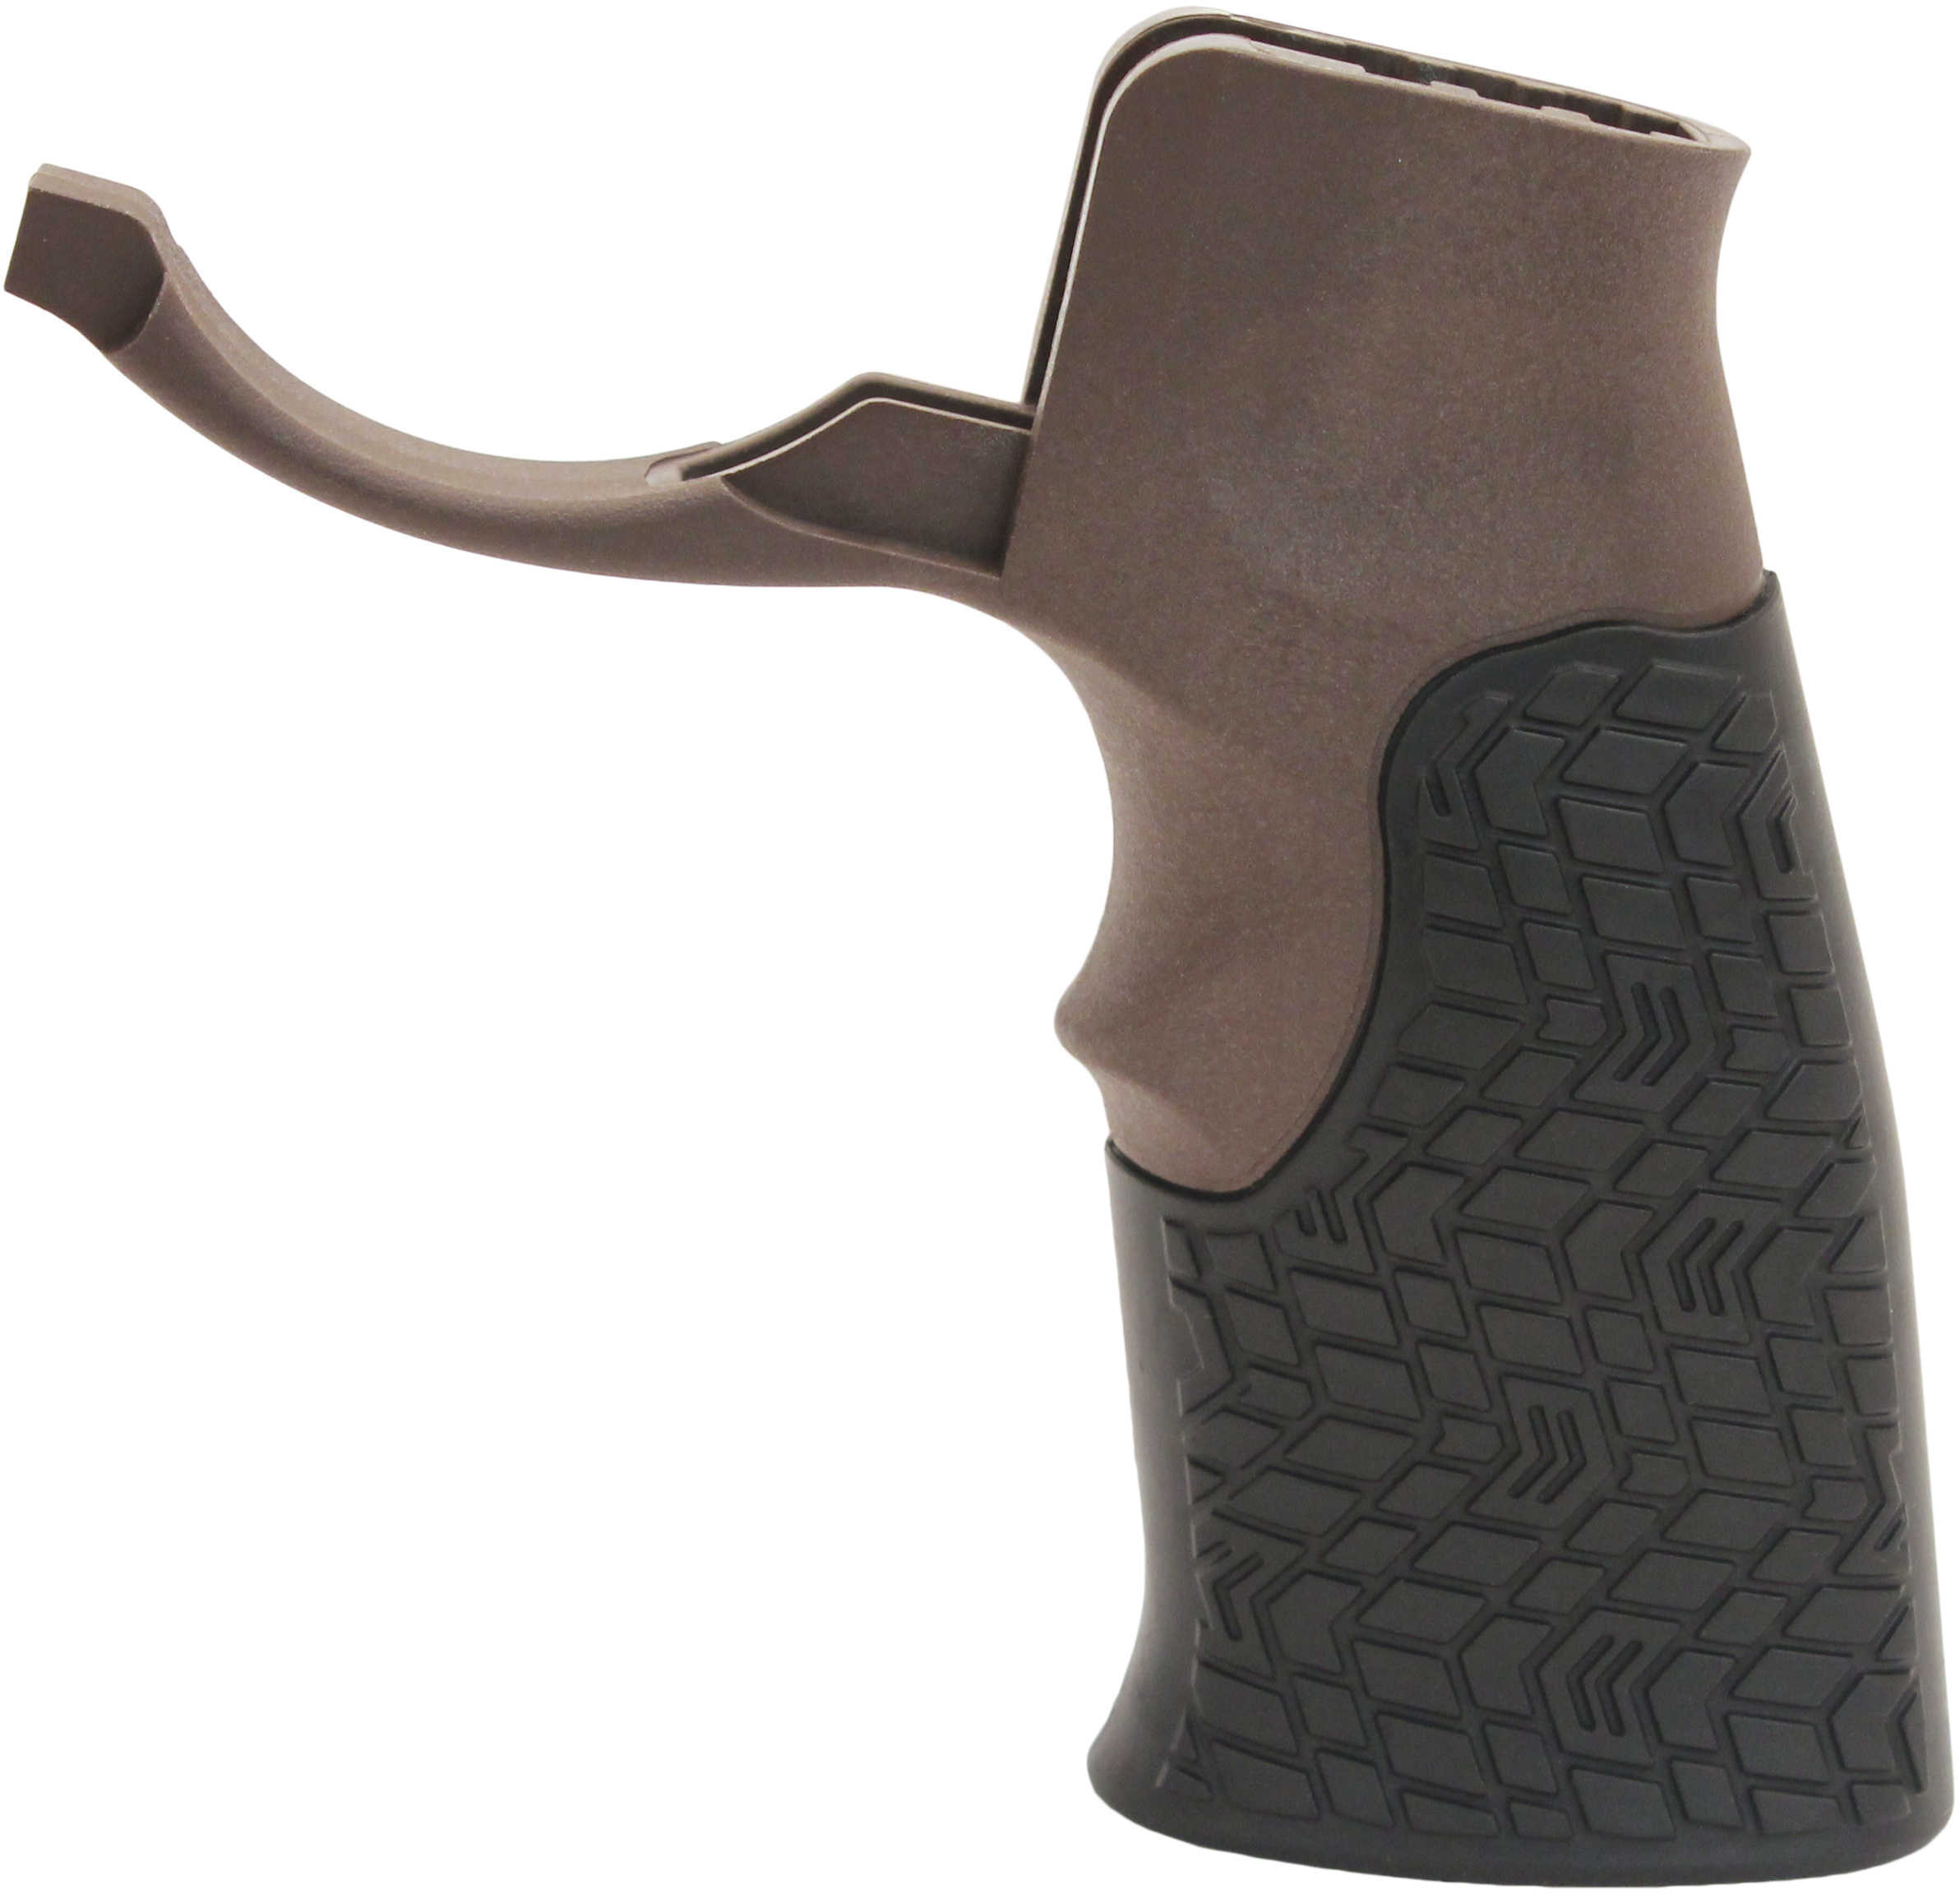 Daniel Def. Grip AR-15 Brown With Integrated Trigger Guard